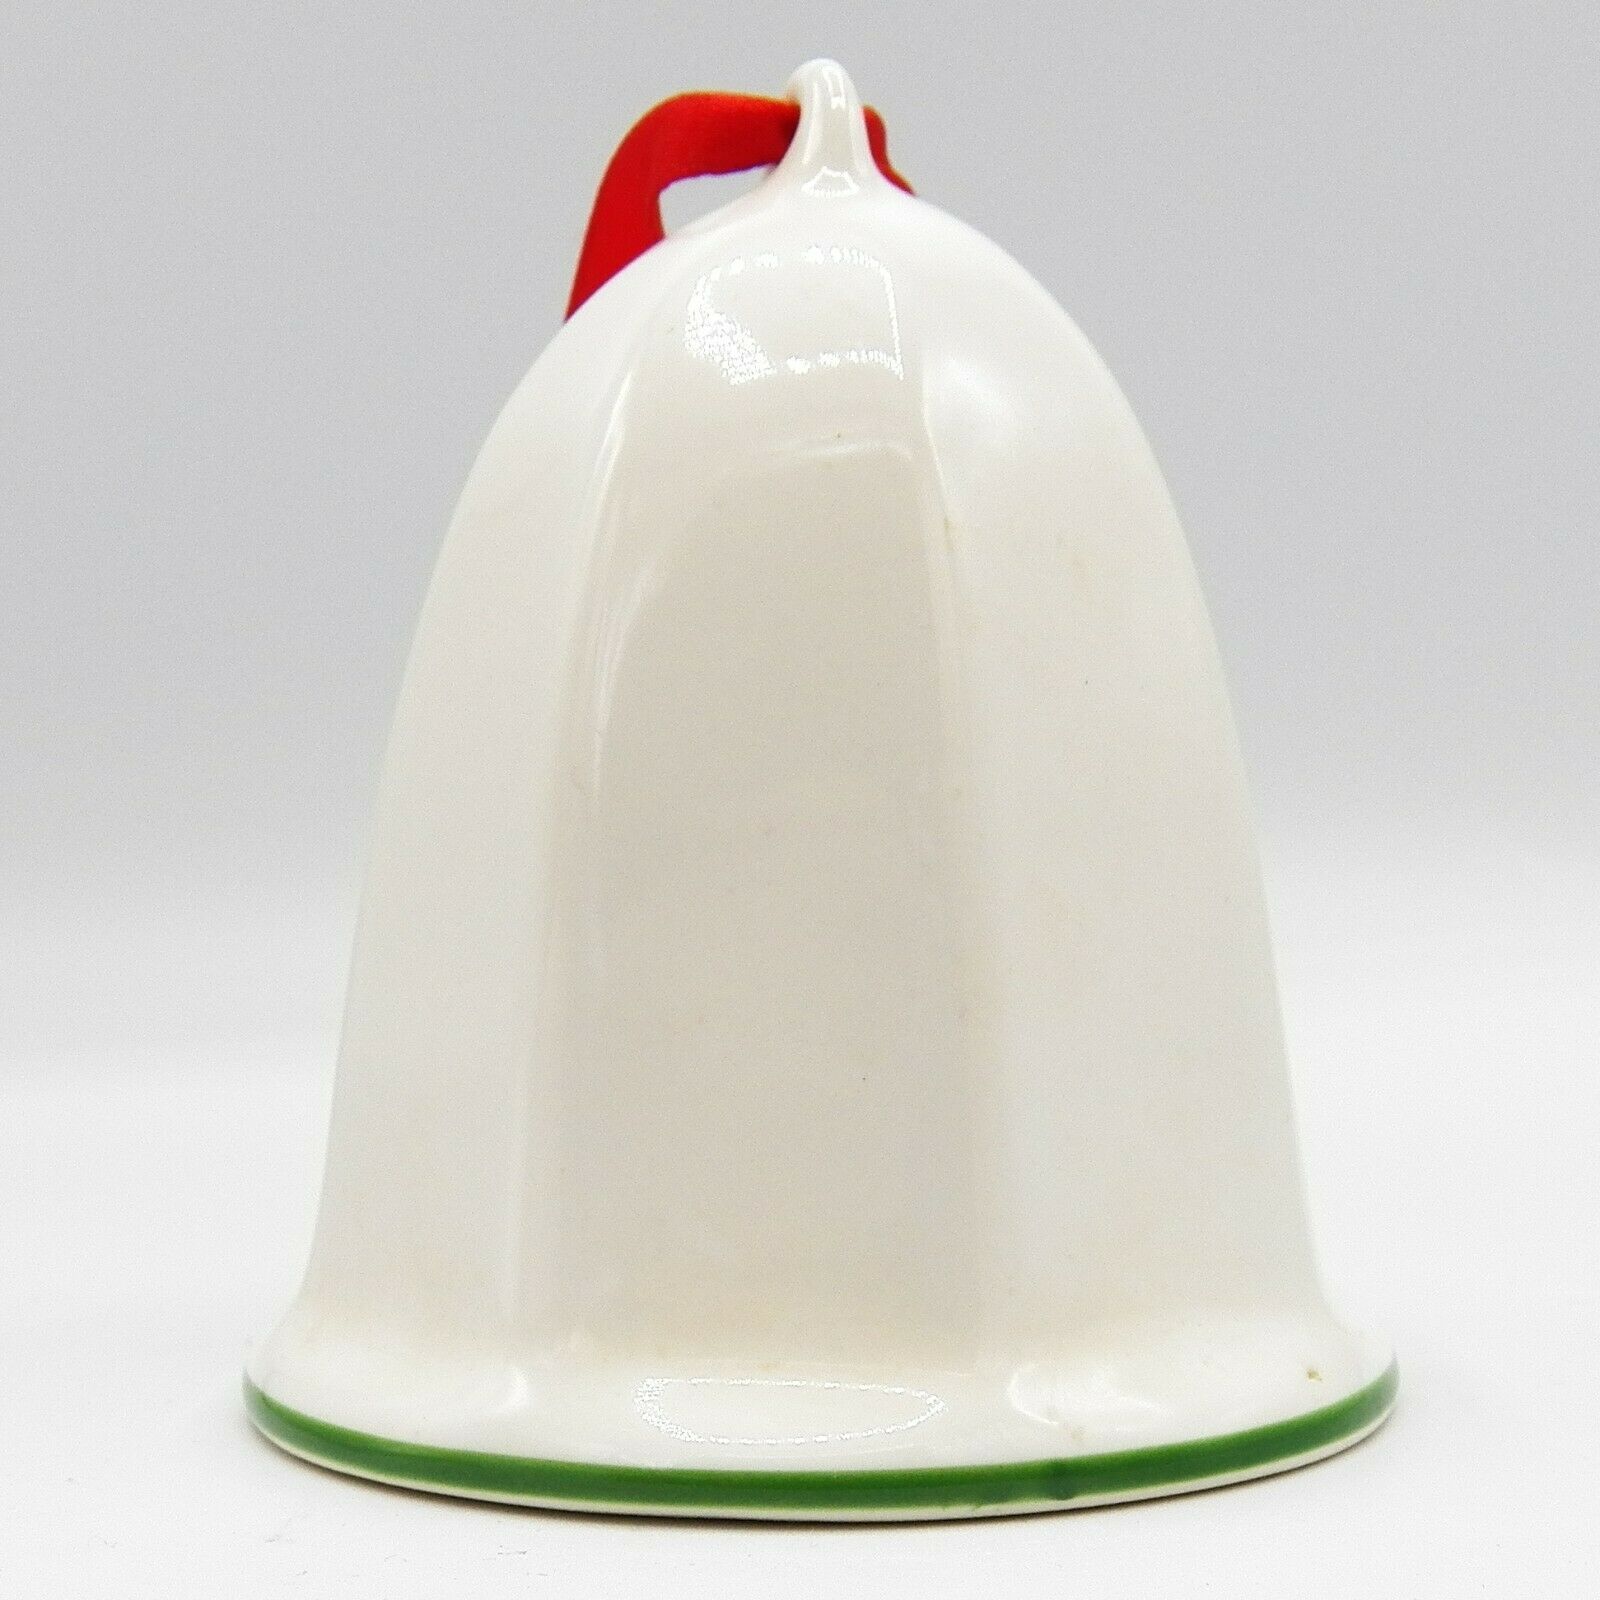 Pfaltzgraff Christmas Heritage Bell Ornament and similar items